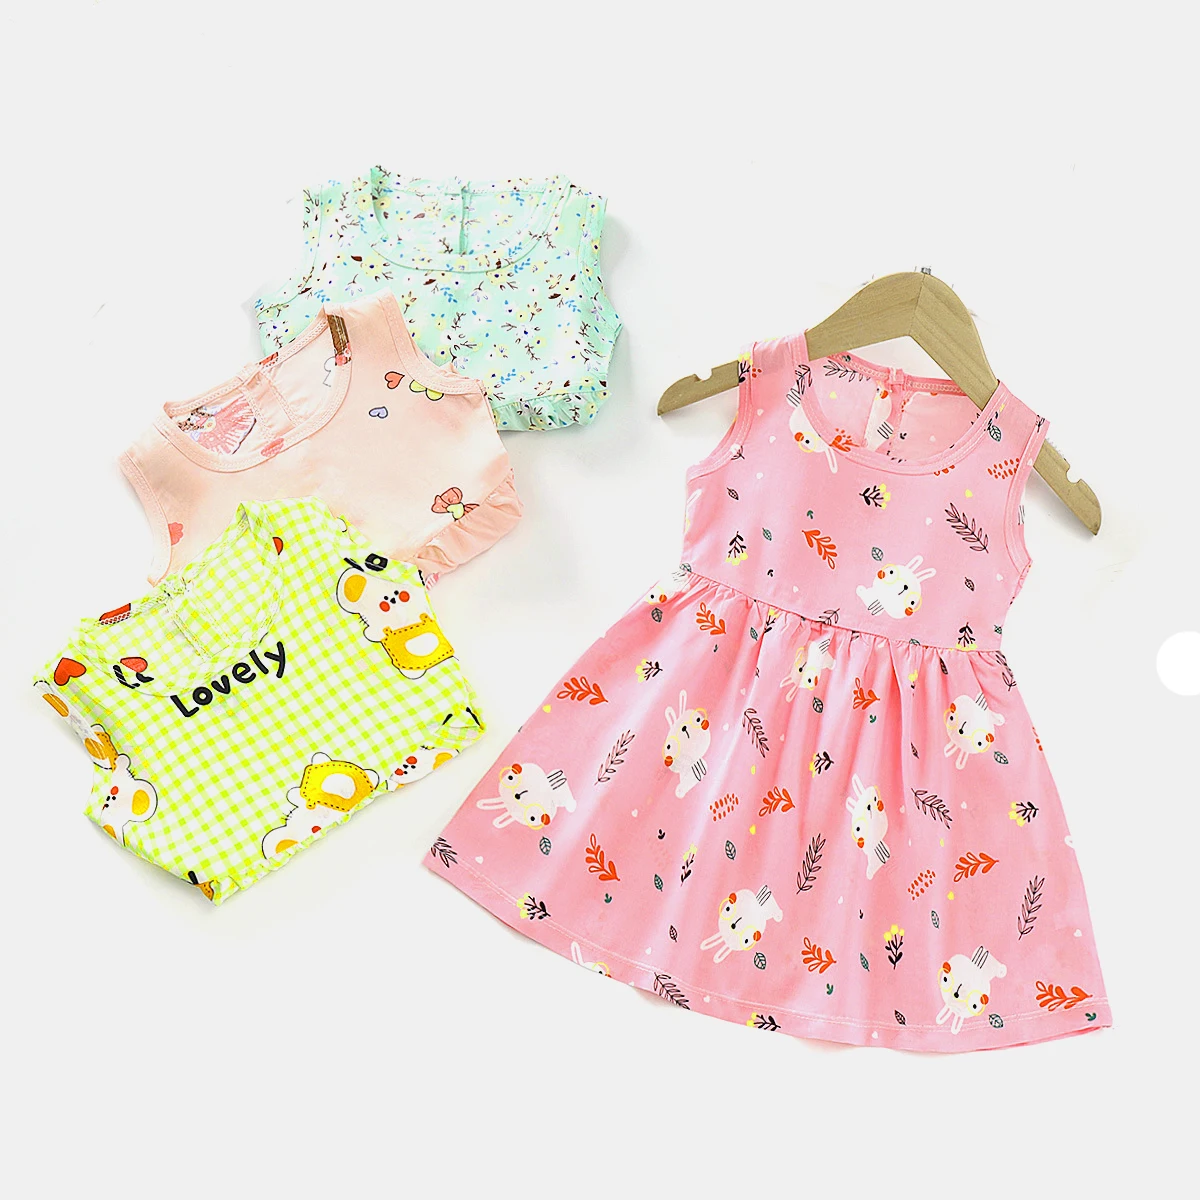 Girls Dresses 3 7Years Baby Girls Sleeveless Solid Color Bow Dress Clothes  Kids Summer Princess Children Party Ball Pageant Outfit From Phononame,  $22.13 | DHgate.Com